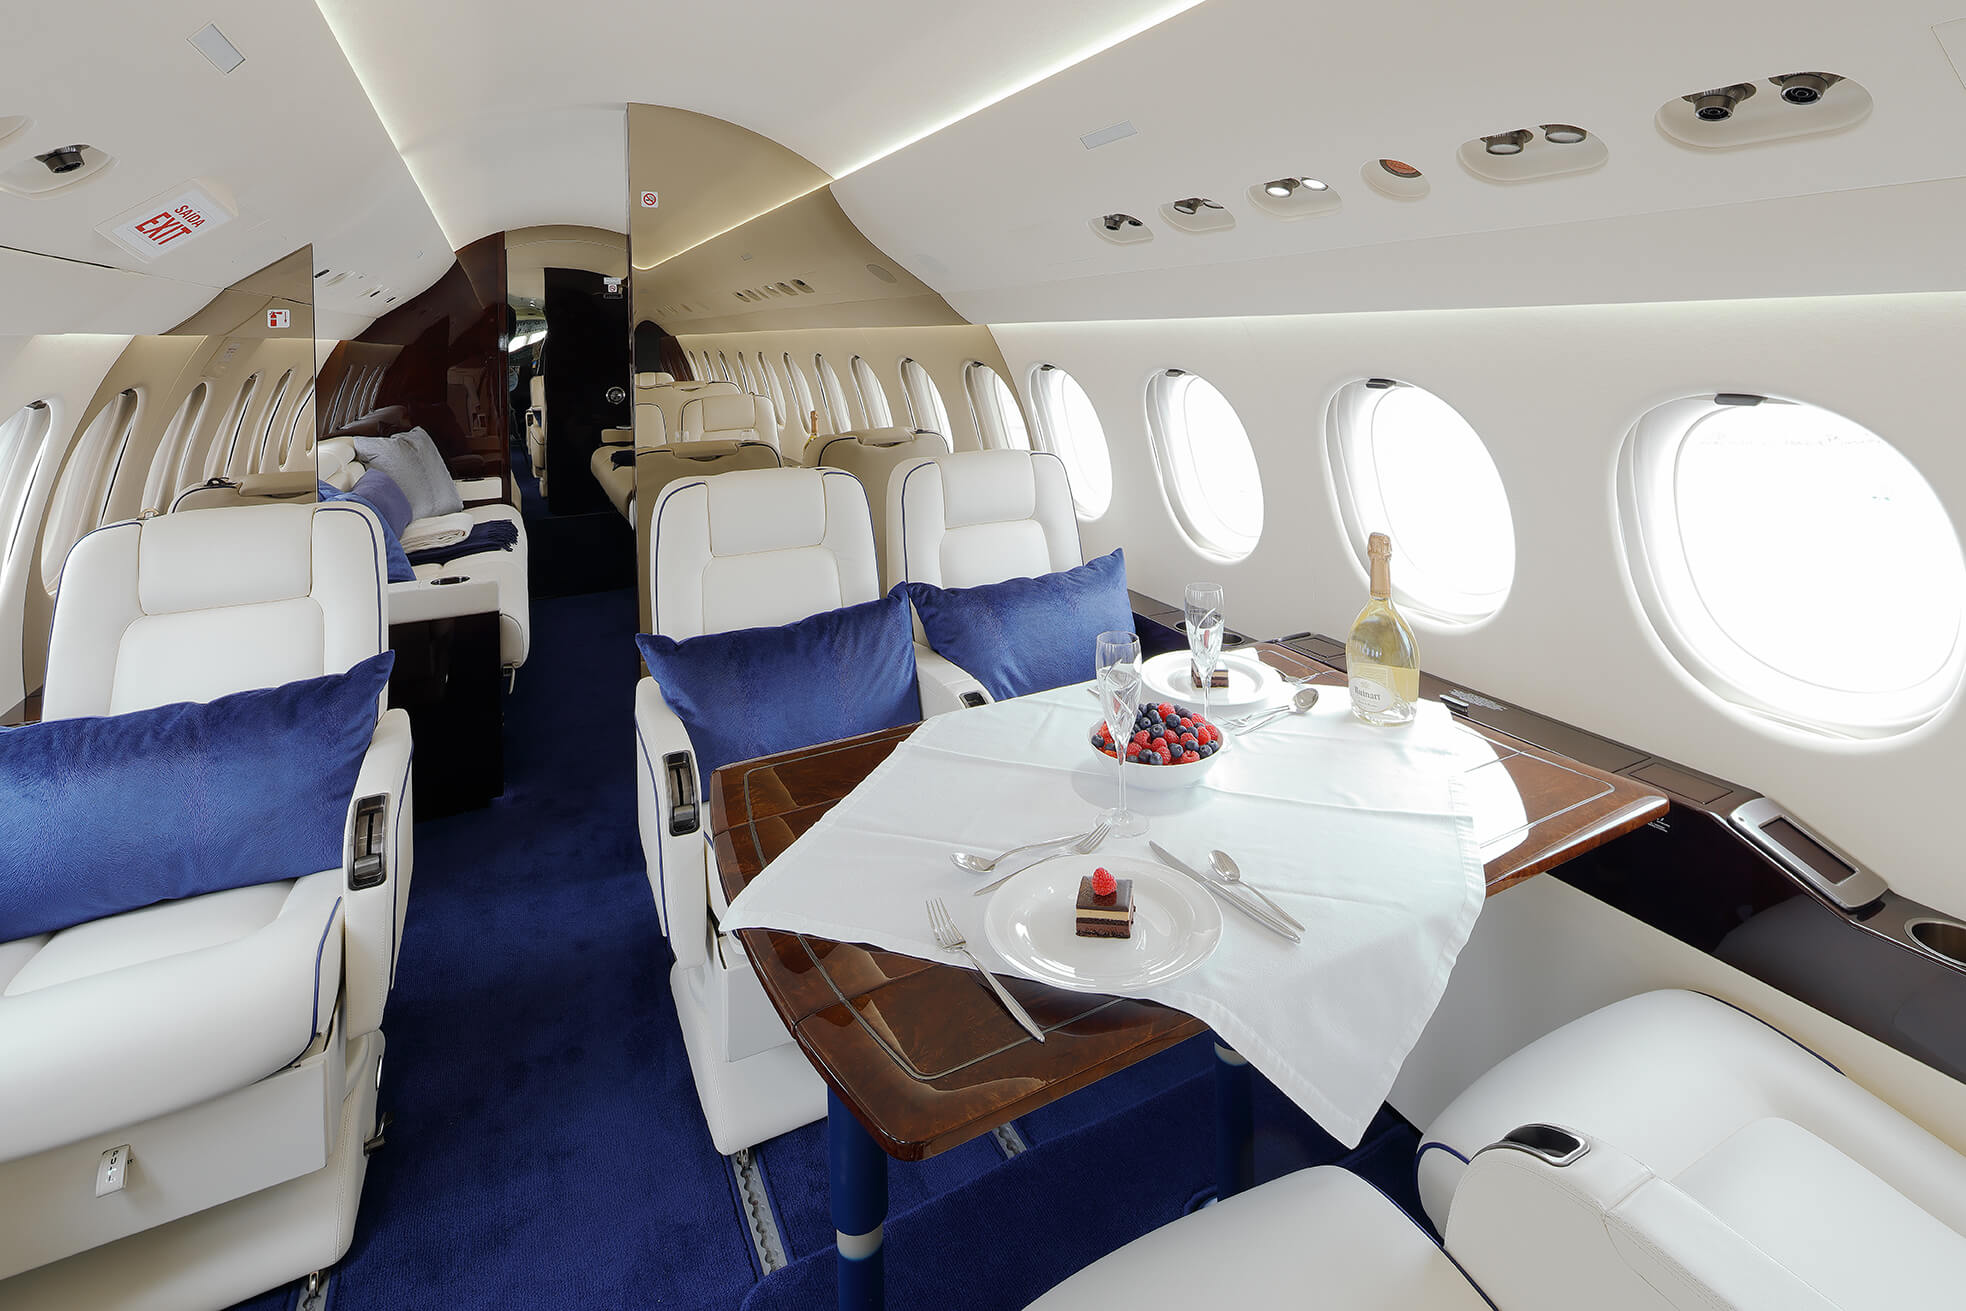 RAS complete upgrade of cabin appearance to a Dassault 7X interior colour and finishes